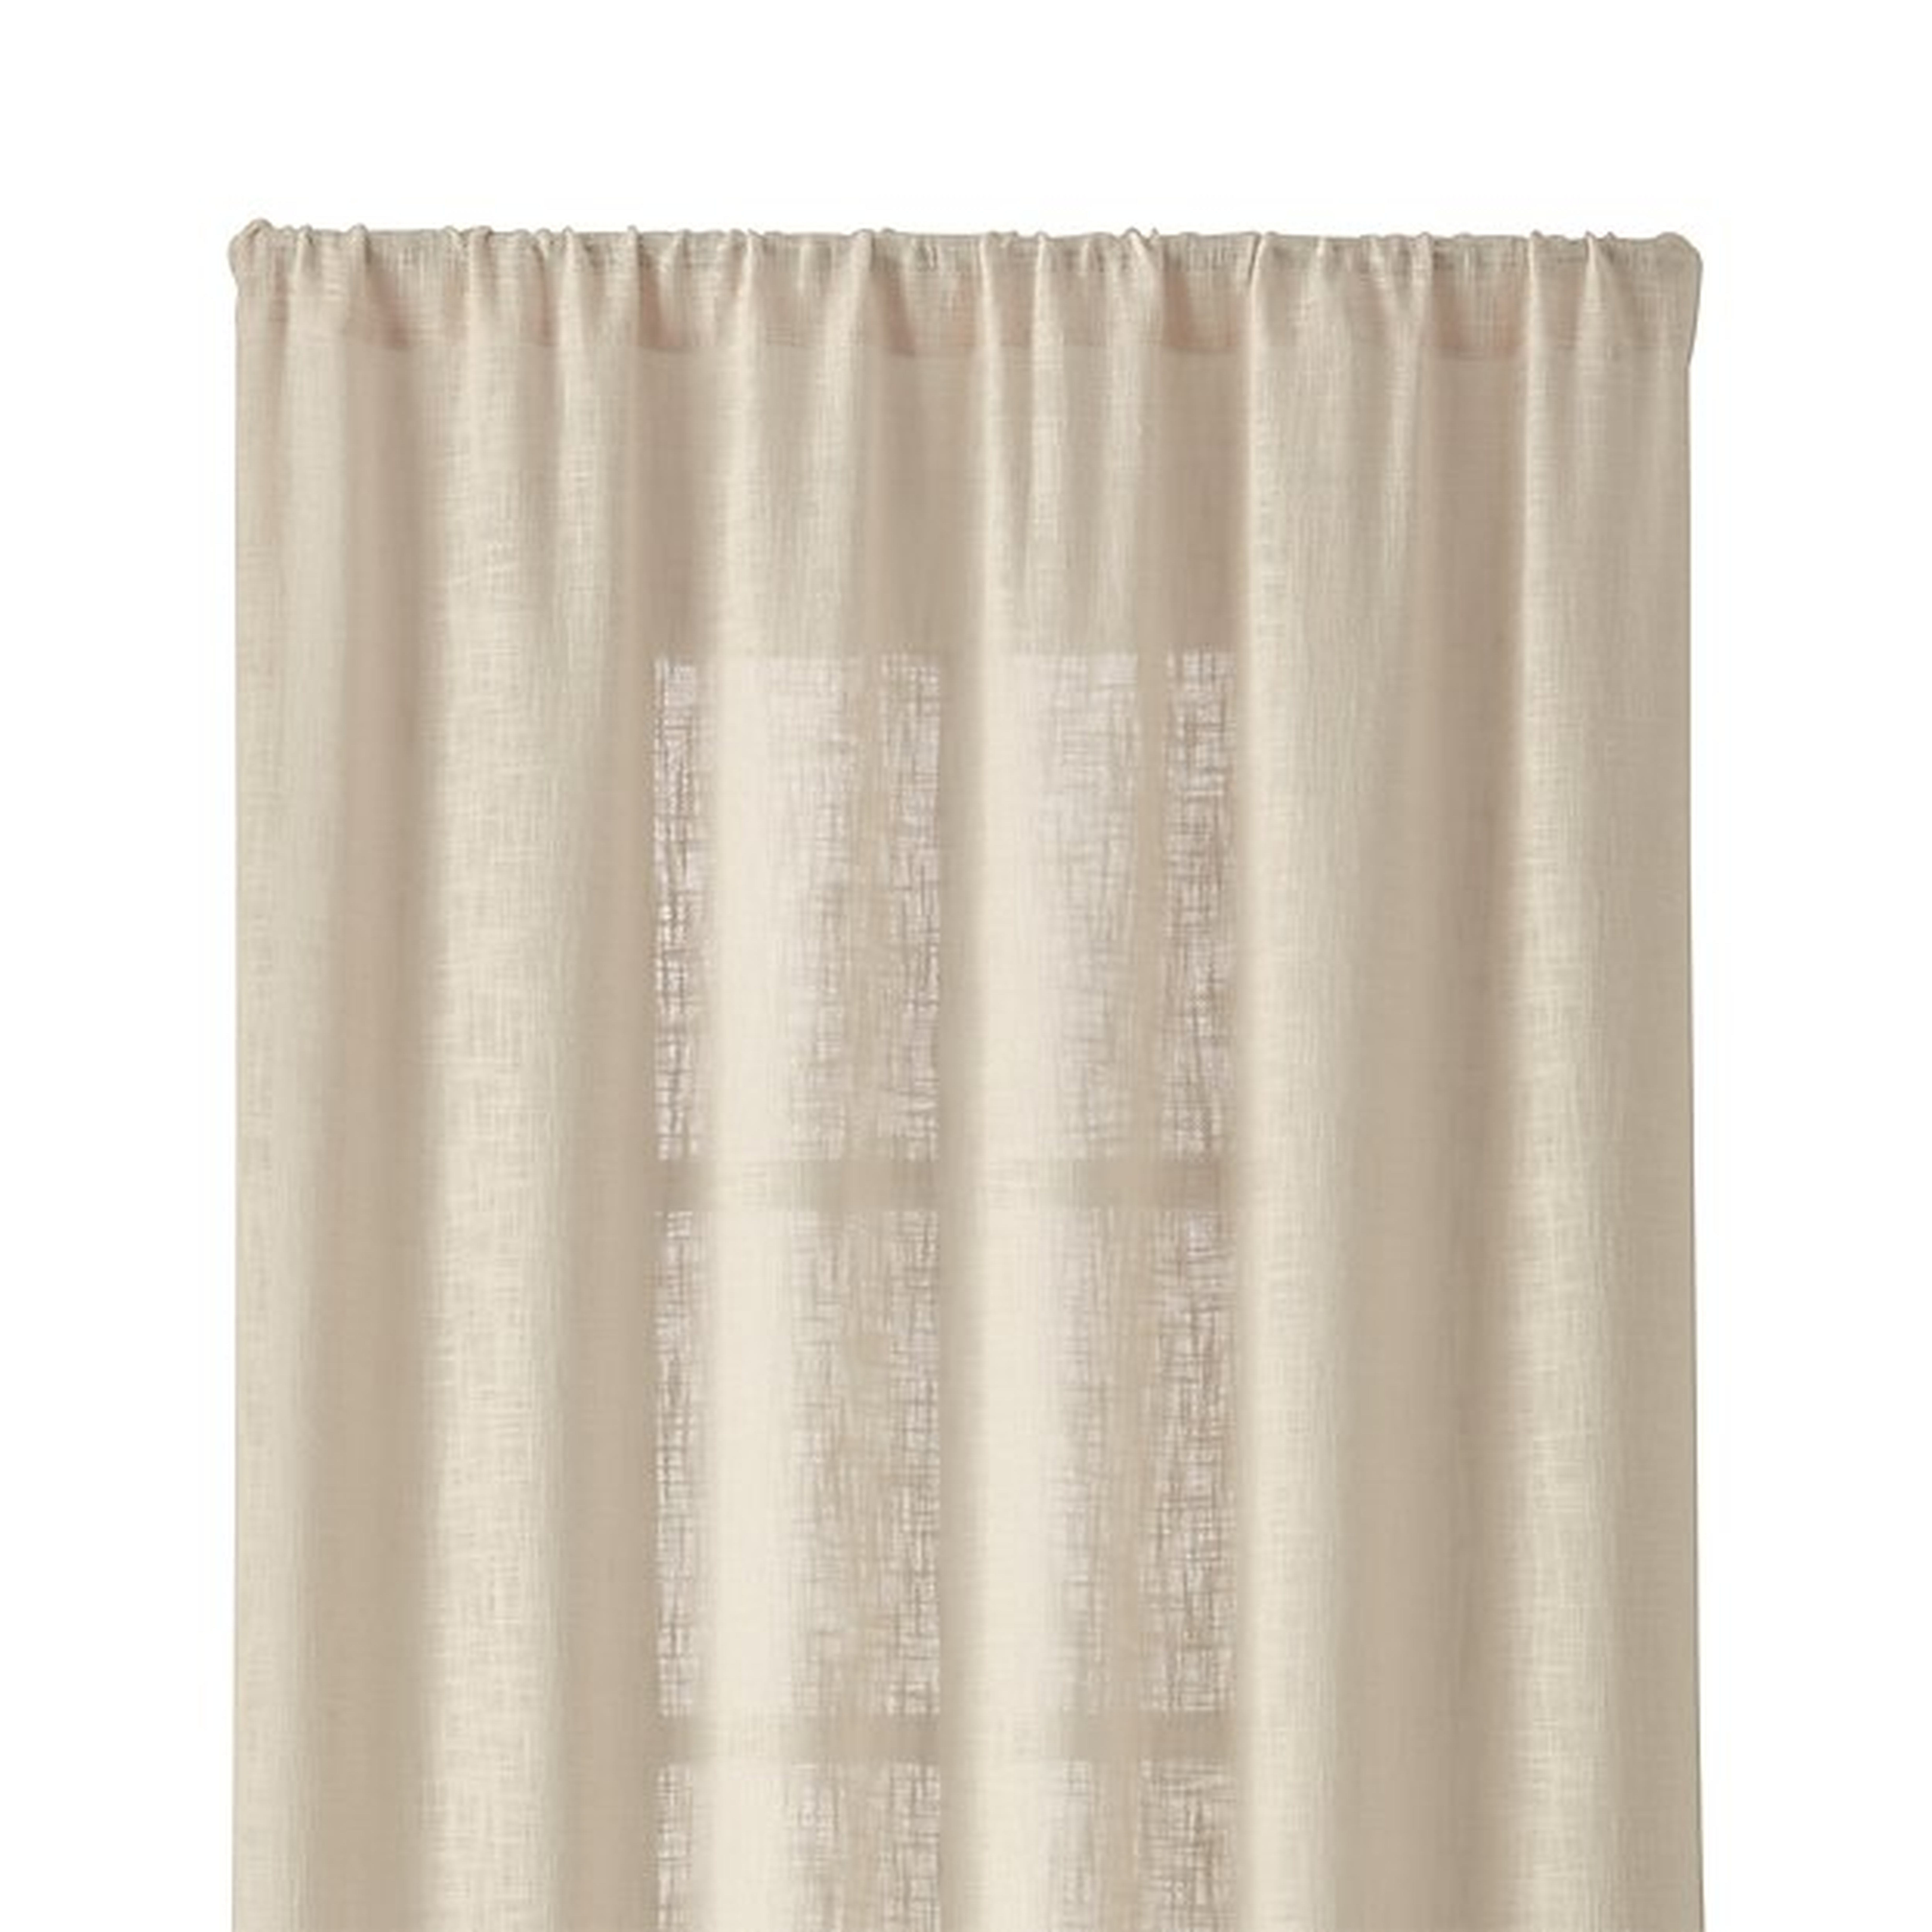 Lindstrom Ivory 48"x84" Curtain Panel - Crate and Barrel